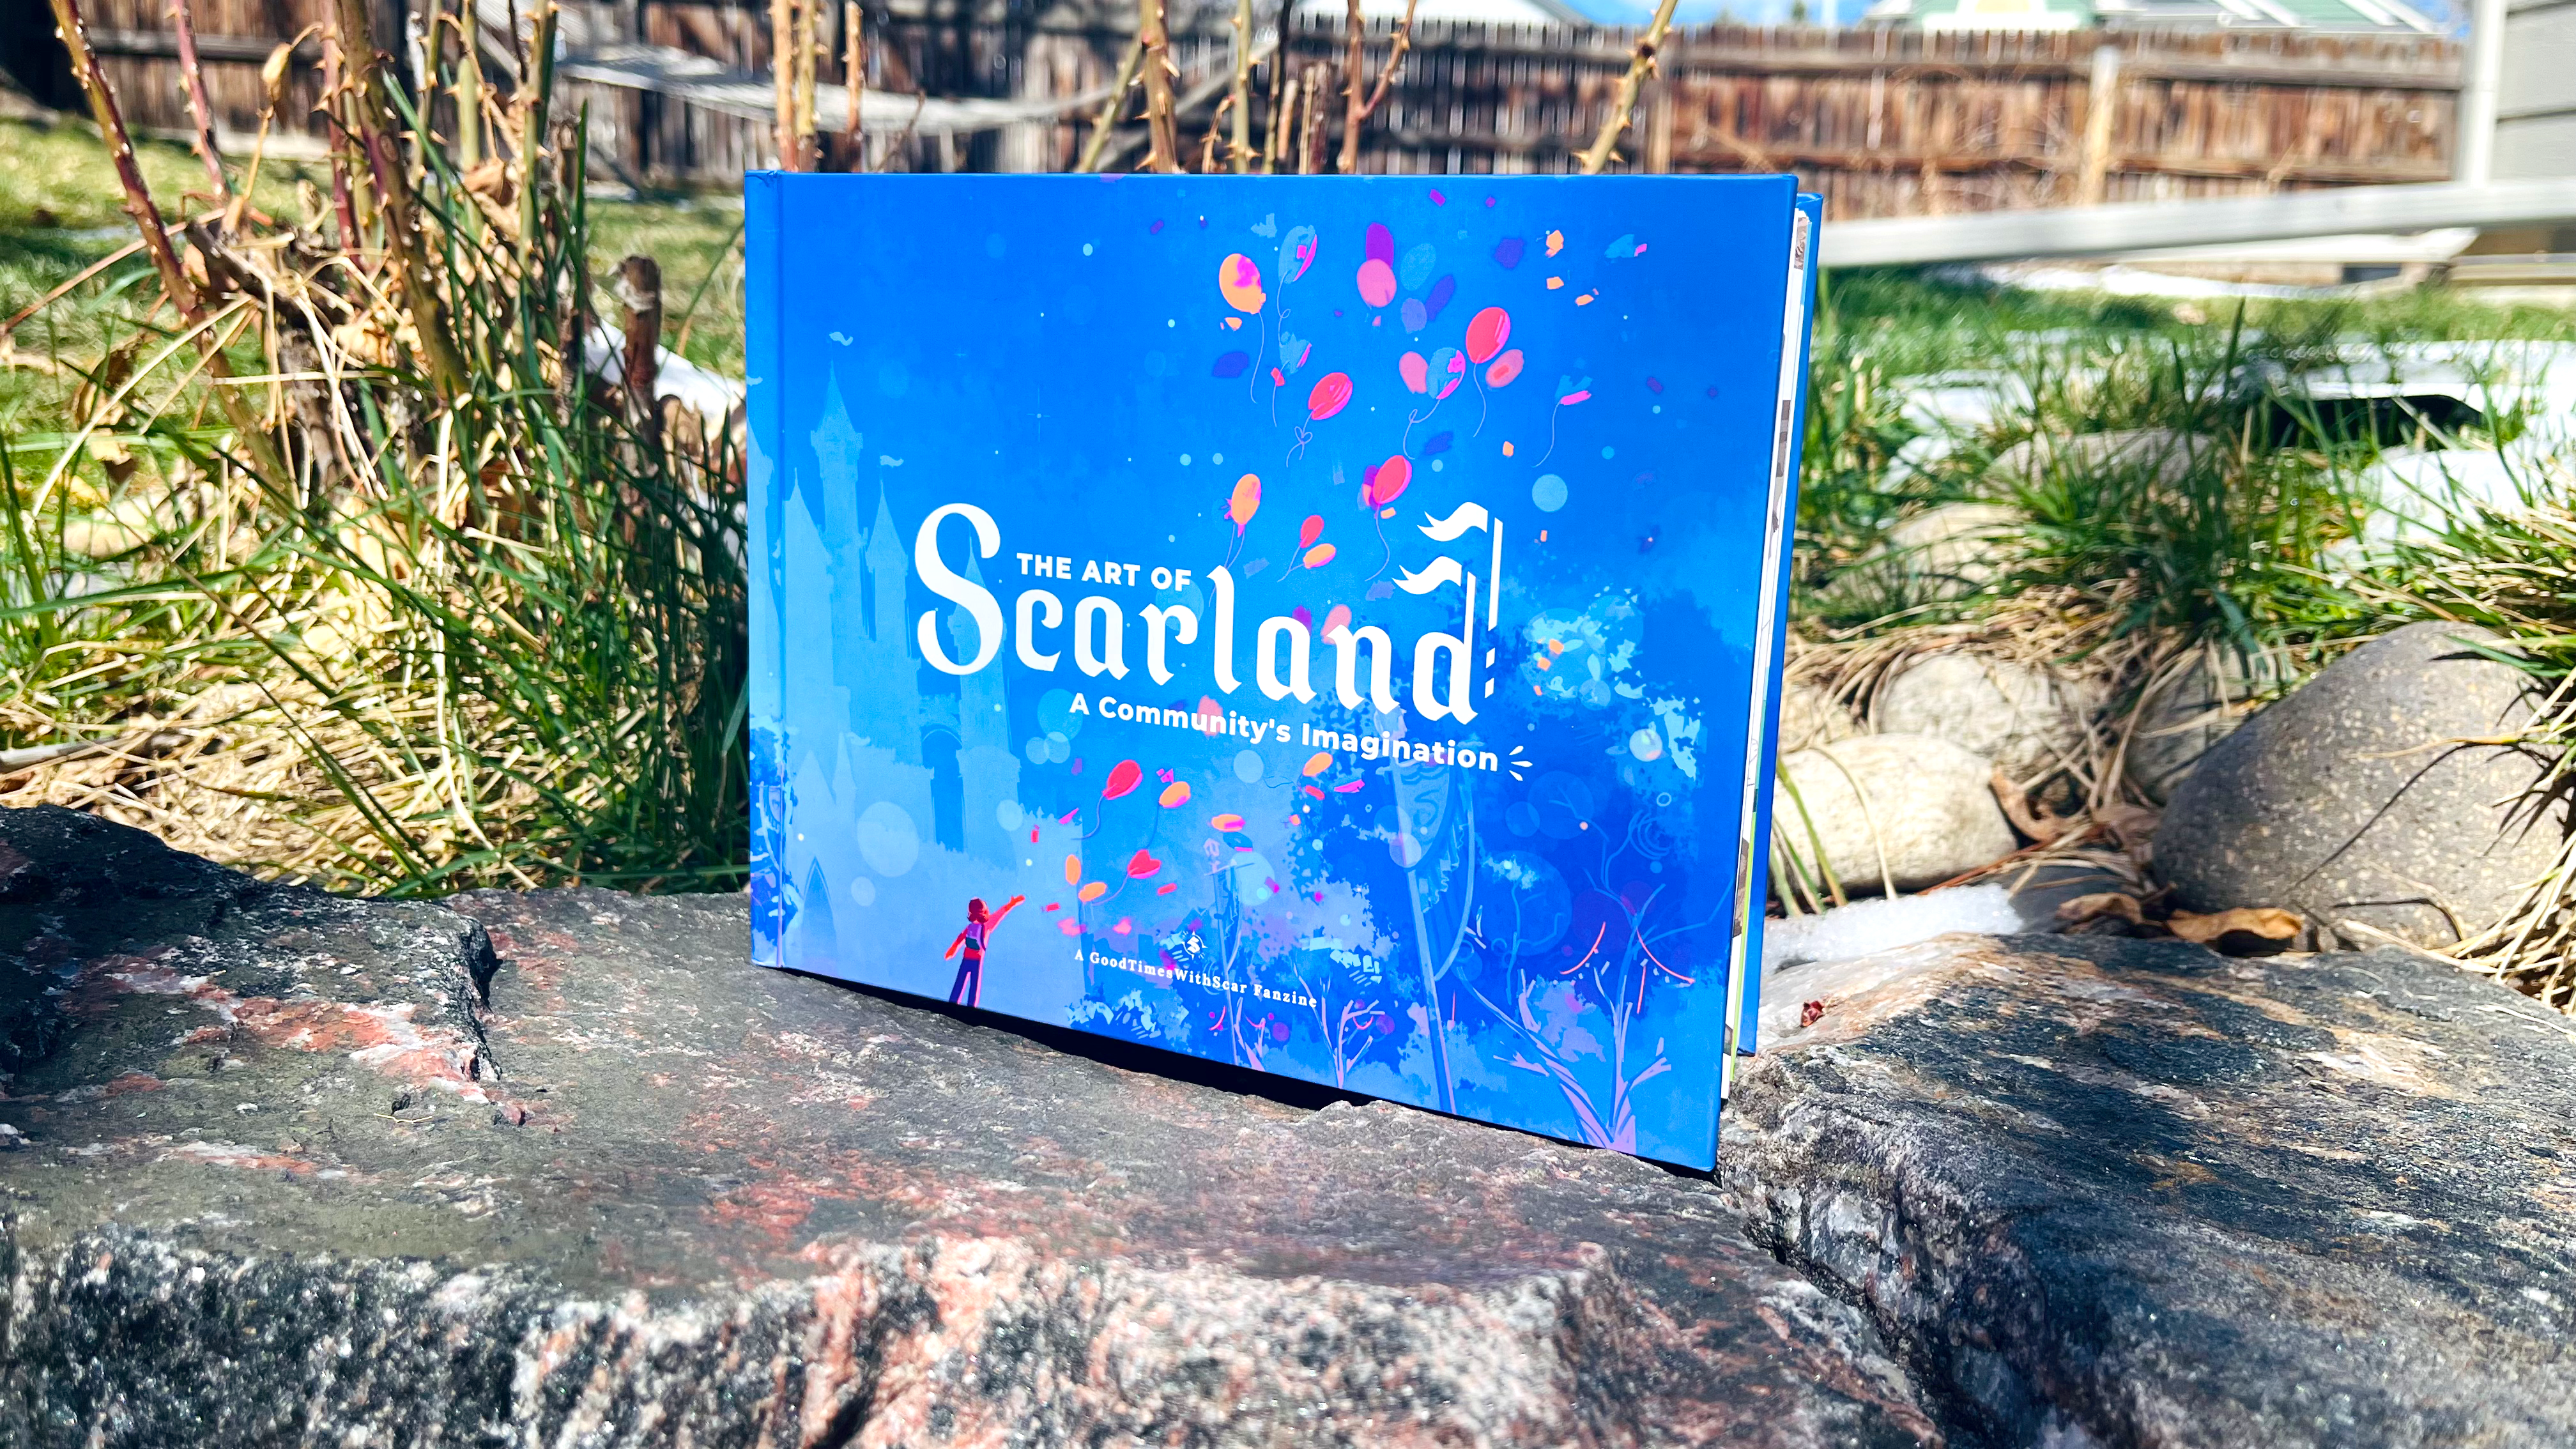 Photo of the Scarland Artbook outdoors. Behind it is grass and a rosebush, and it sits on blue rocks. A fence is distantly visible in the background.